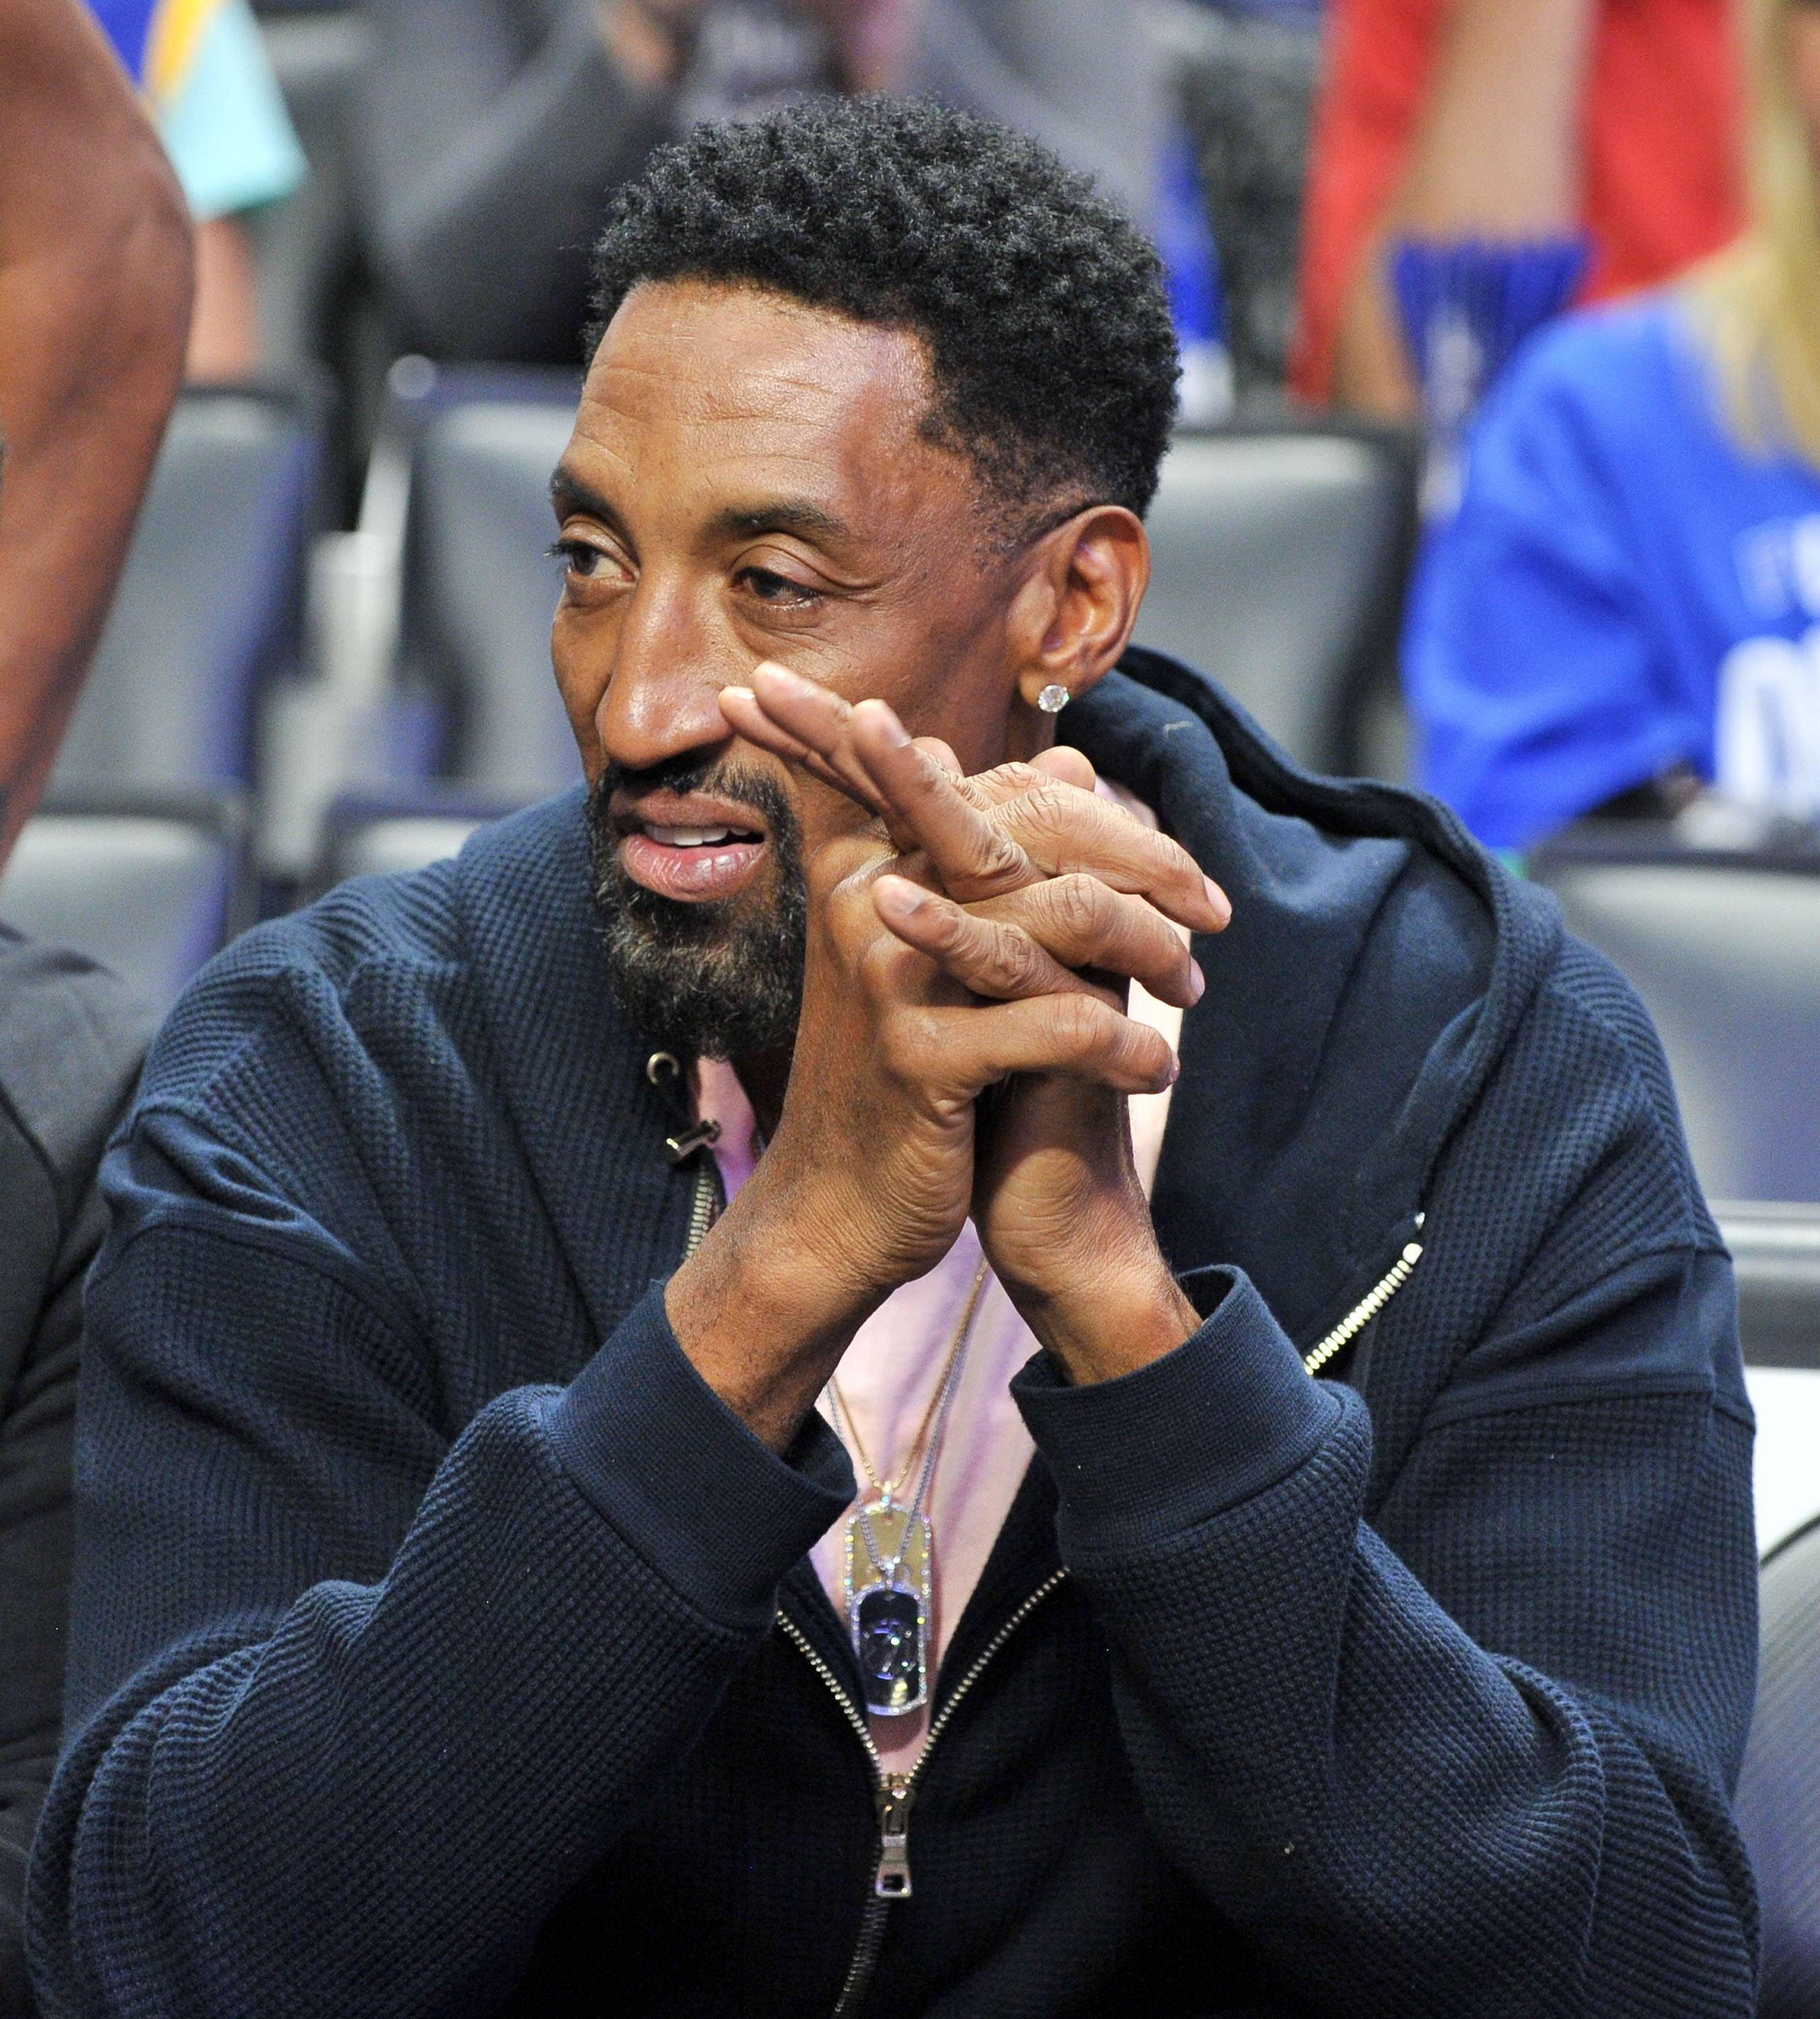 LOS ANGELES, CALIFORNIA - APRIL 18: Scottie Pippen attends an NBA playoffs basketball game between the Los Angeles Clippers and the Golden State Warriors at Staples Center on April 18, 2019 in Los Angeles, California. (Photo by Allen Berezovsky/Getty Images)